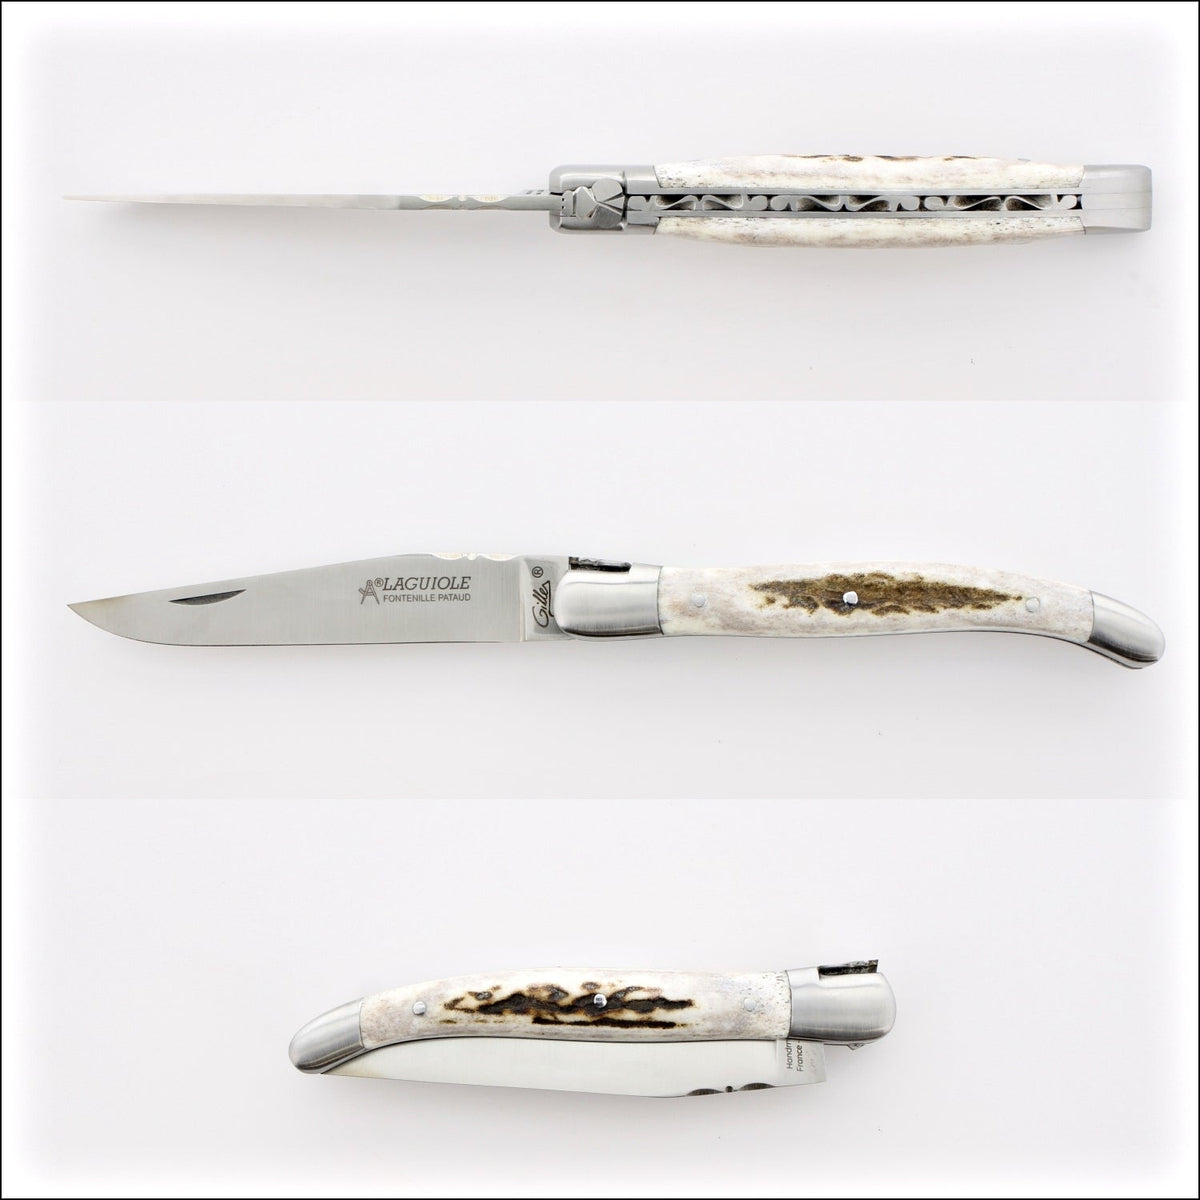 Laguiole Traditional 12 cm Knife Deer Stag